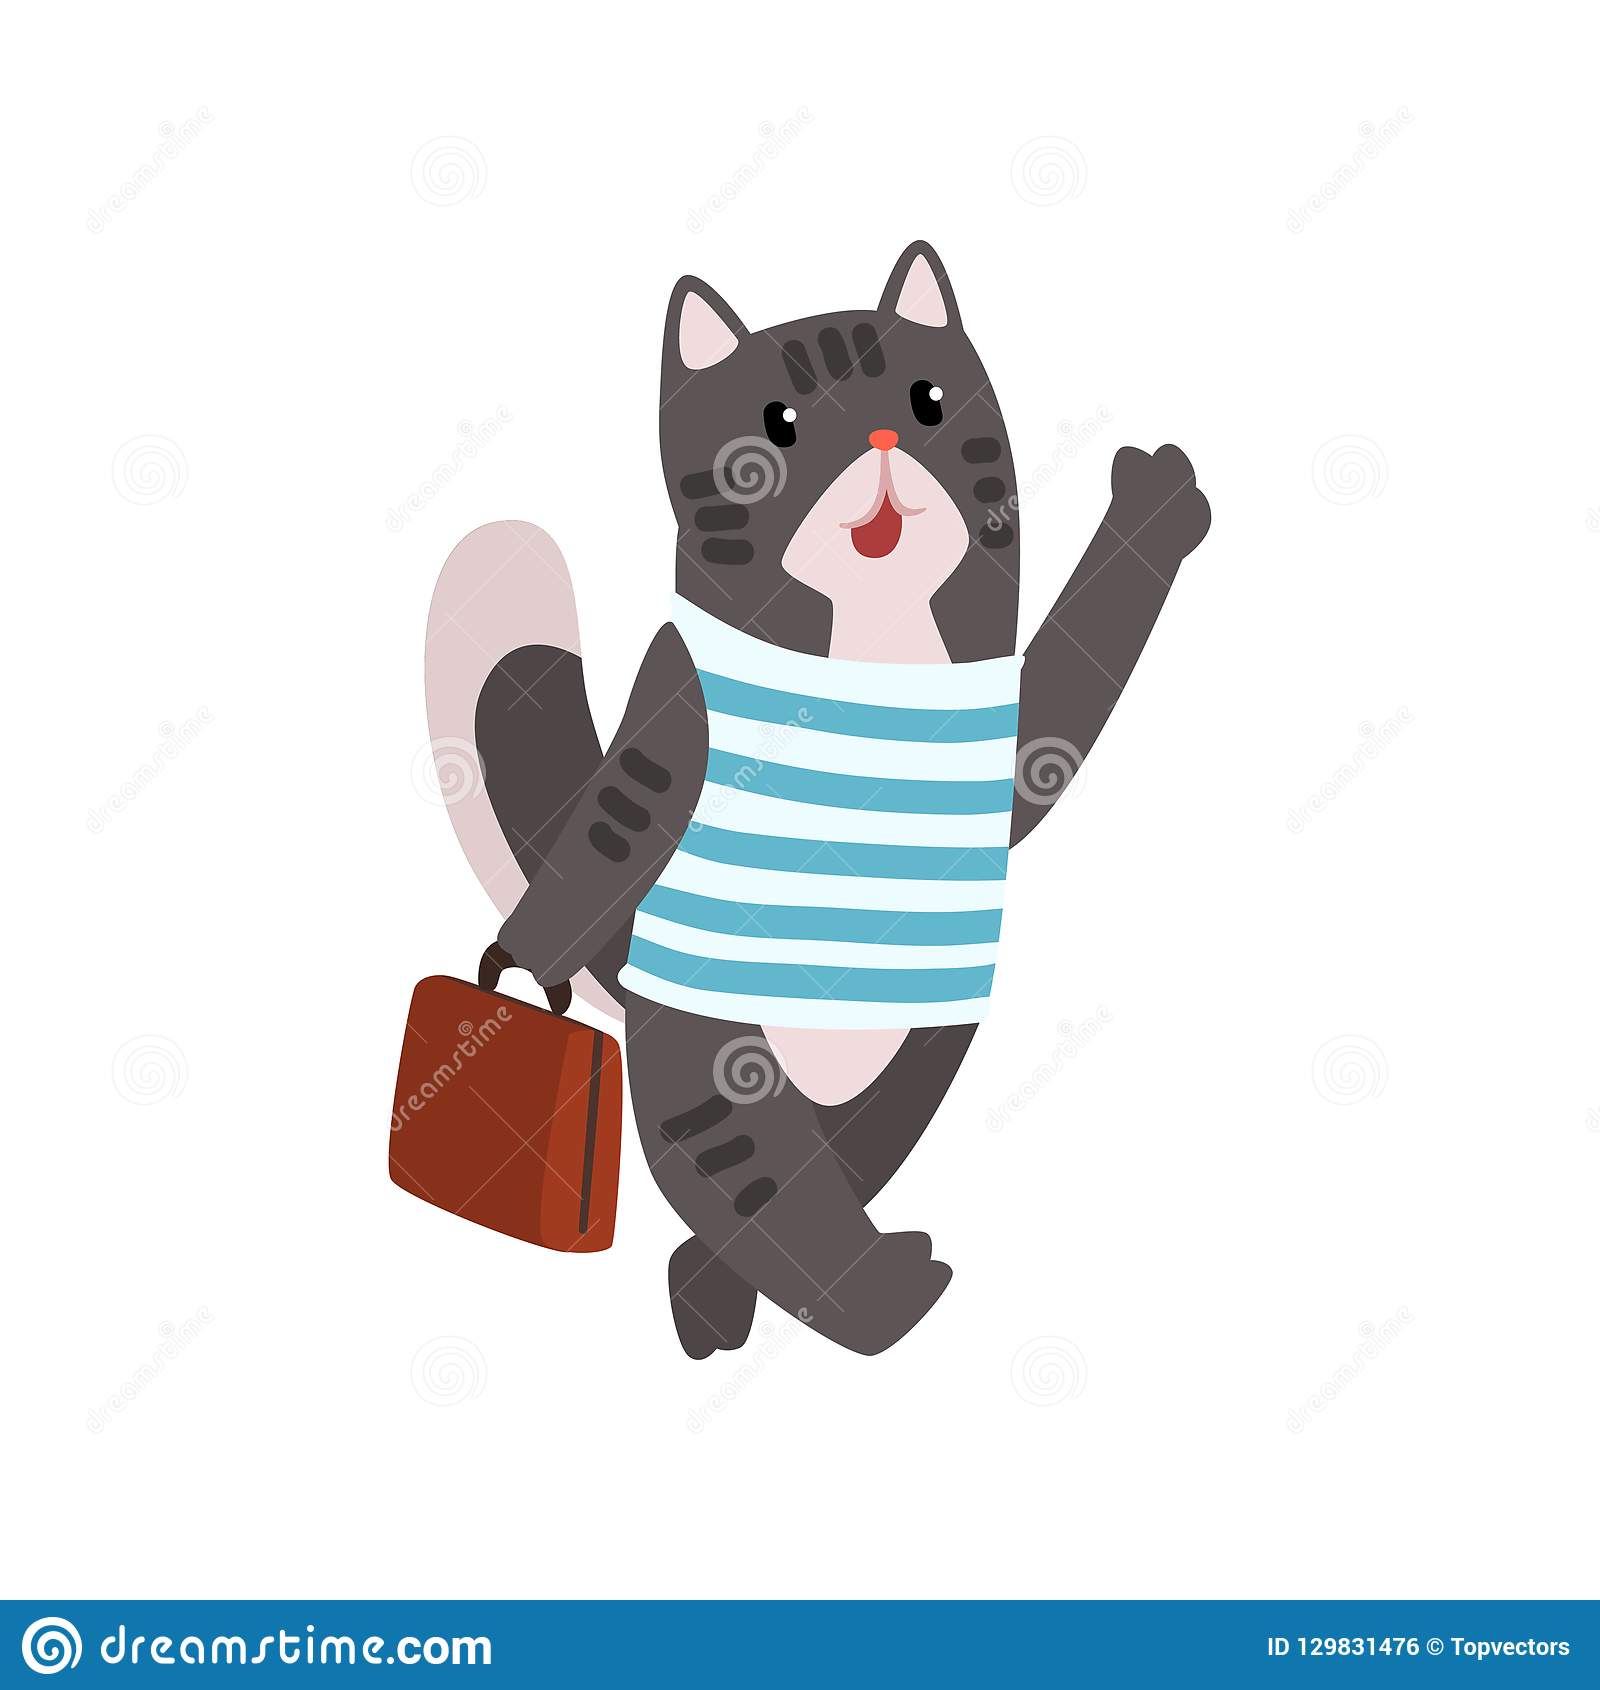 Cute Cat Animal Cartoon Character Traveling With Suitcase